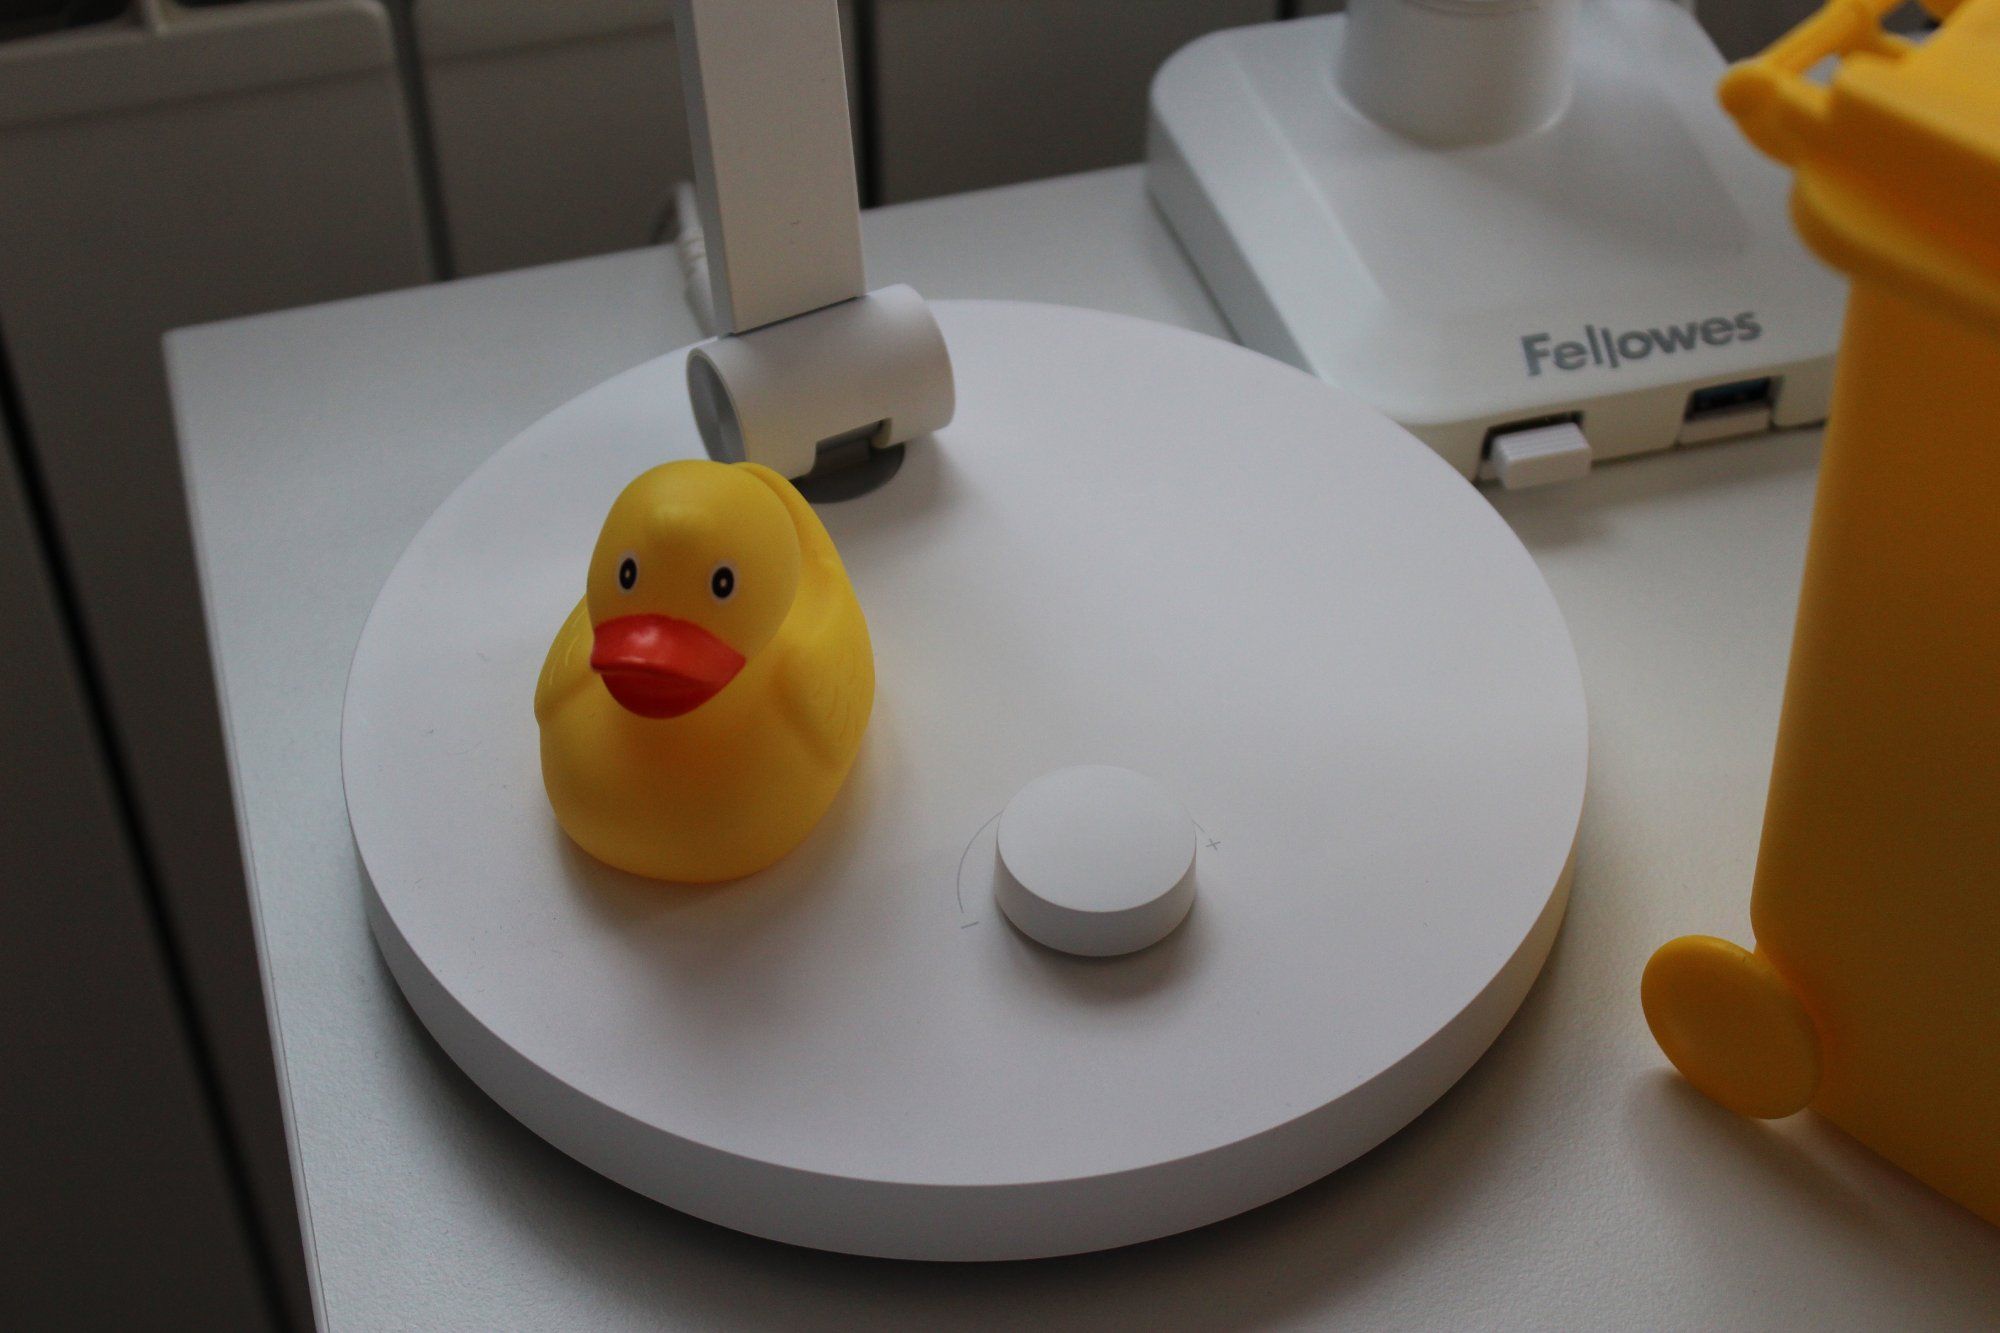 A rubber duck that programmers use to fix bugs by explaining a problem in natural language to someone unfamiliar with it (rubberducking, or rubber duck debugging method)